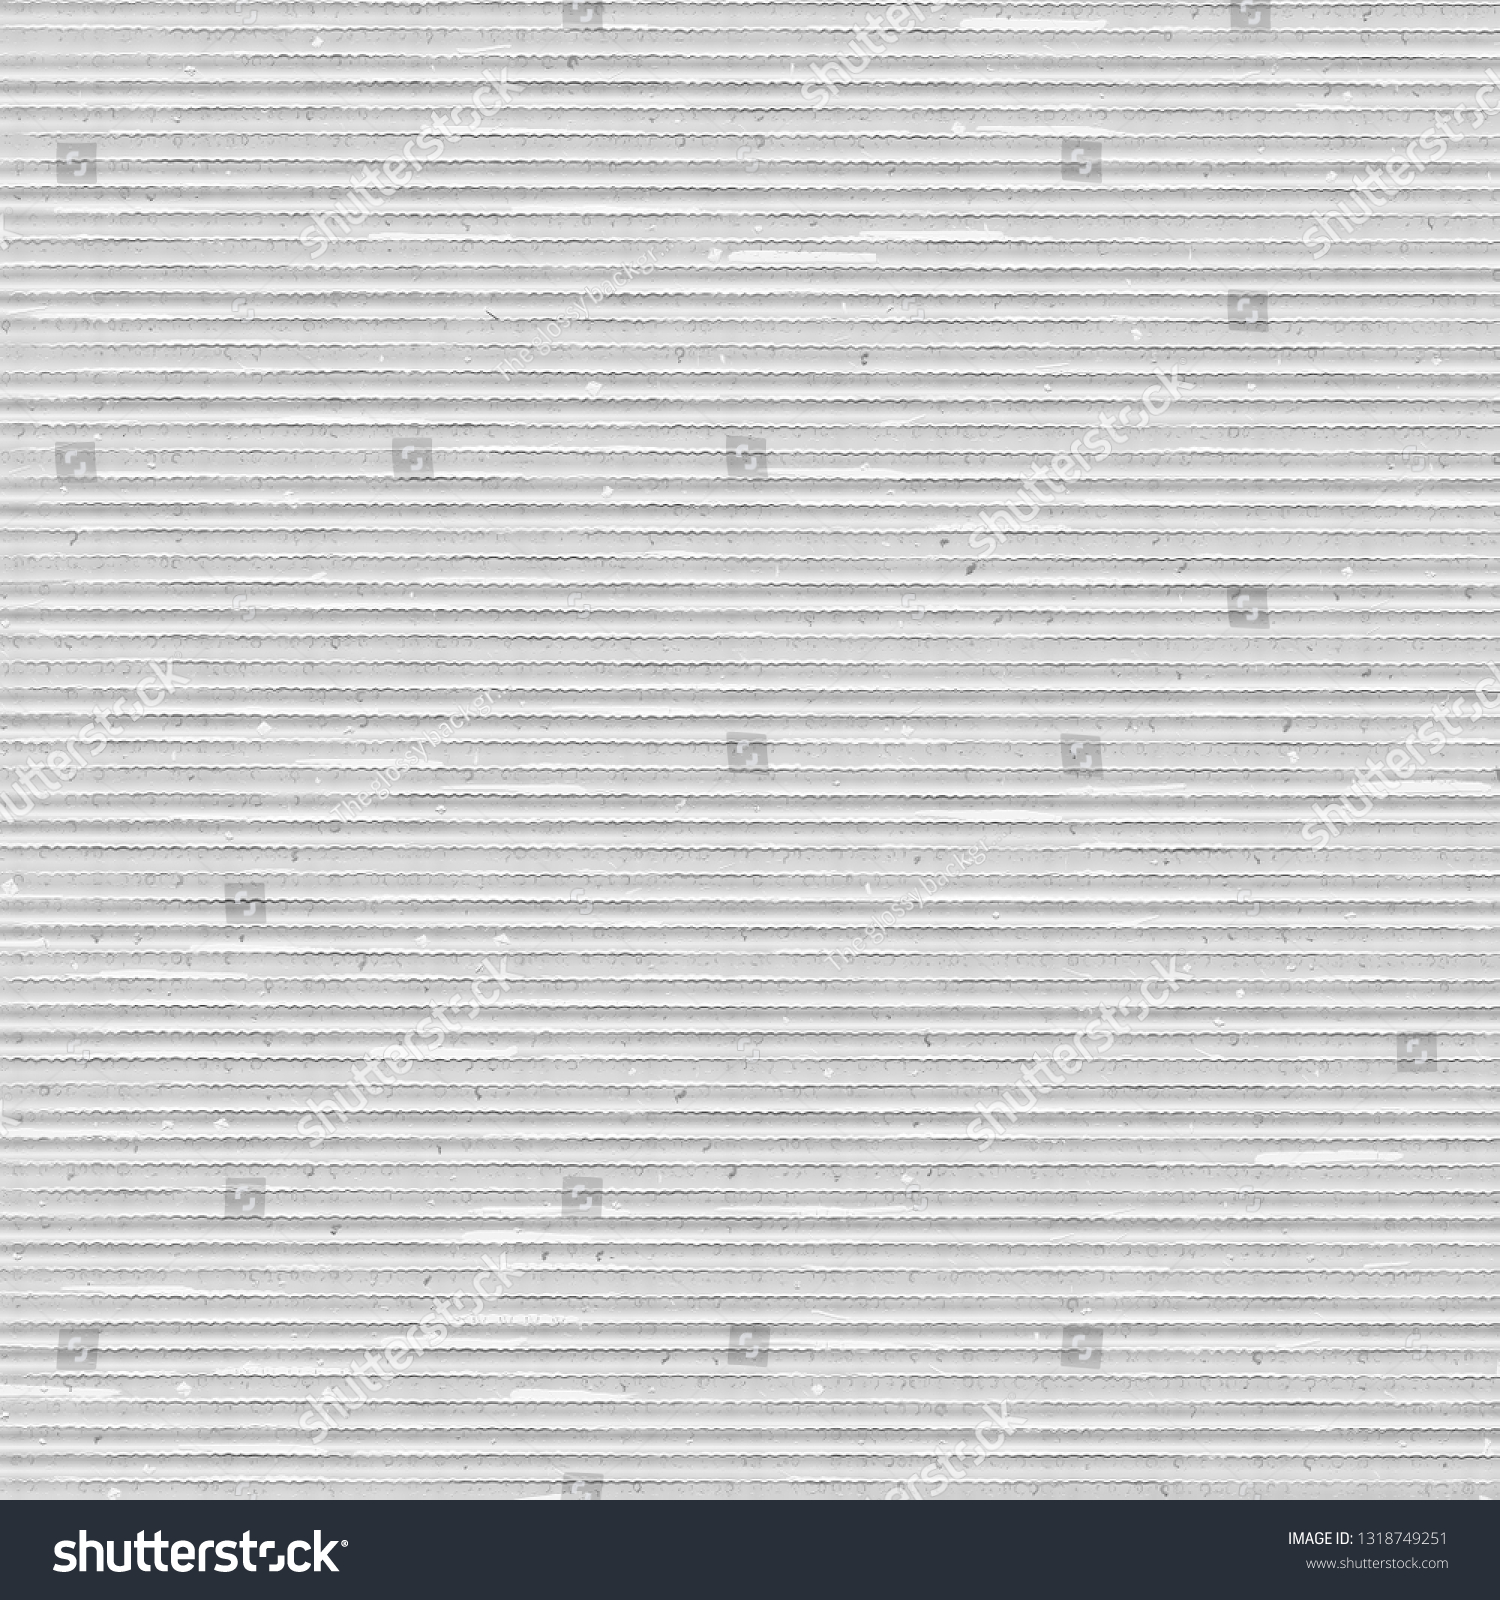 white clean background texture new. wall  paper shape  and have copy space for text. #1318749251